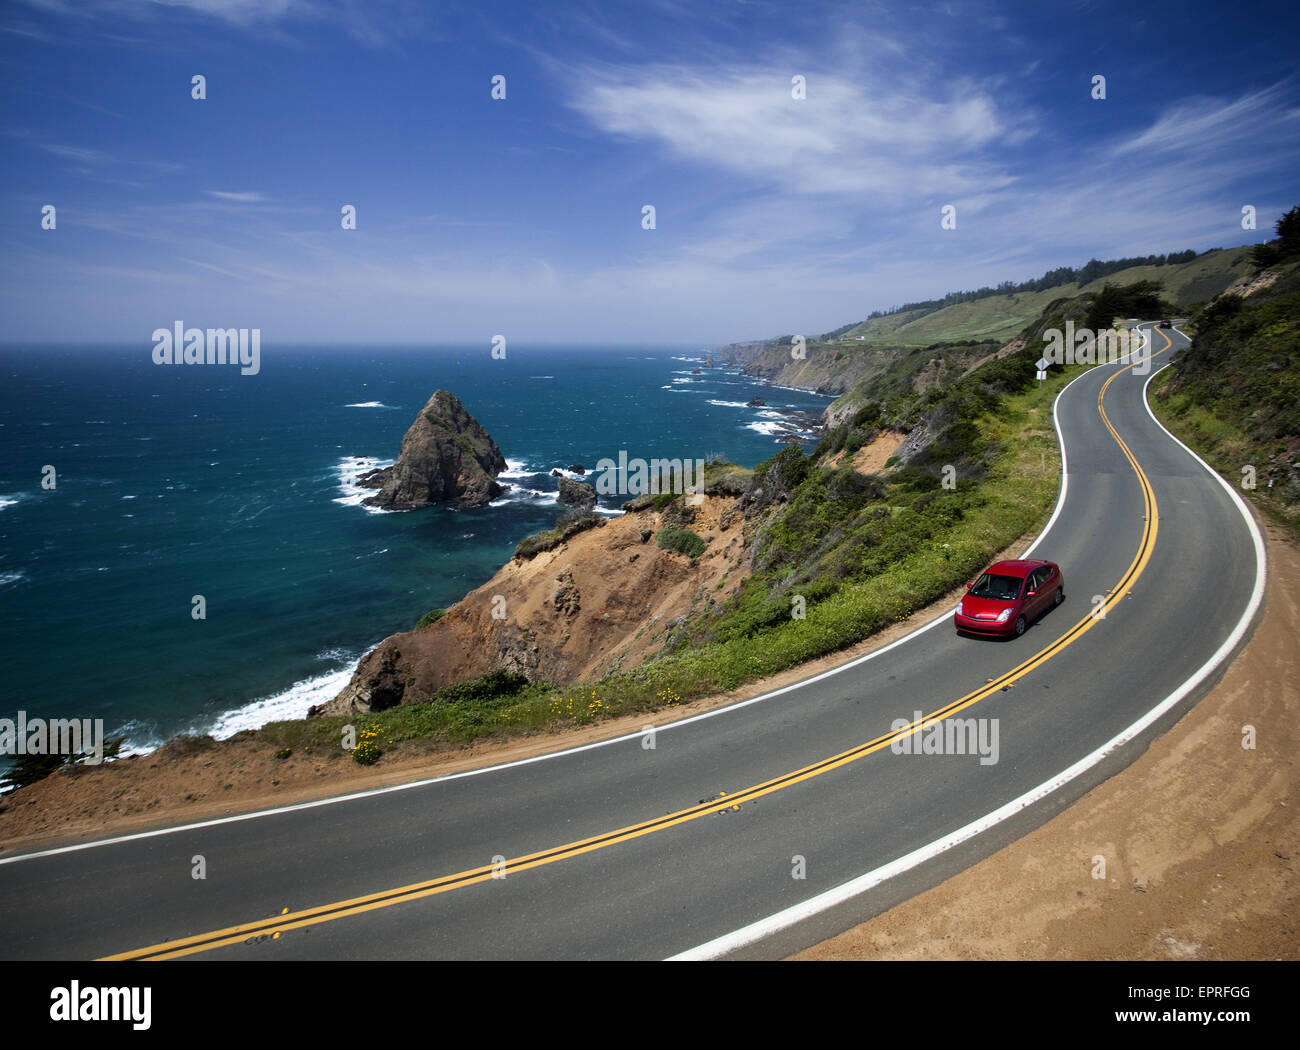 A red car drives on a highway near the ocean. Stock Photo